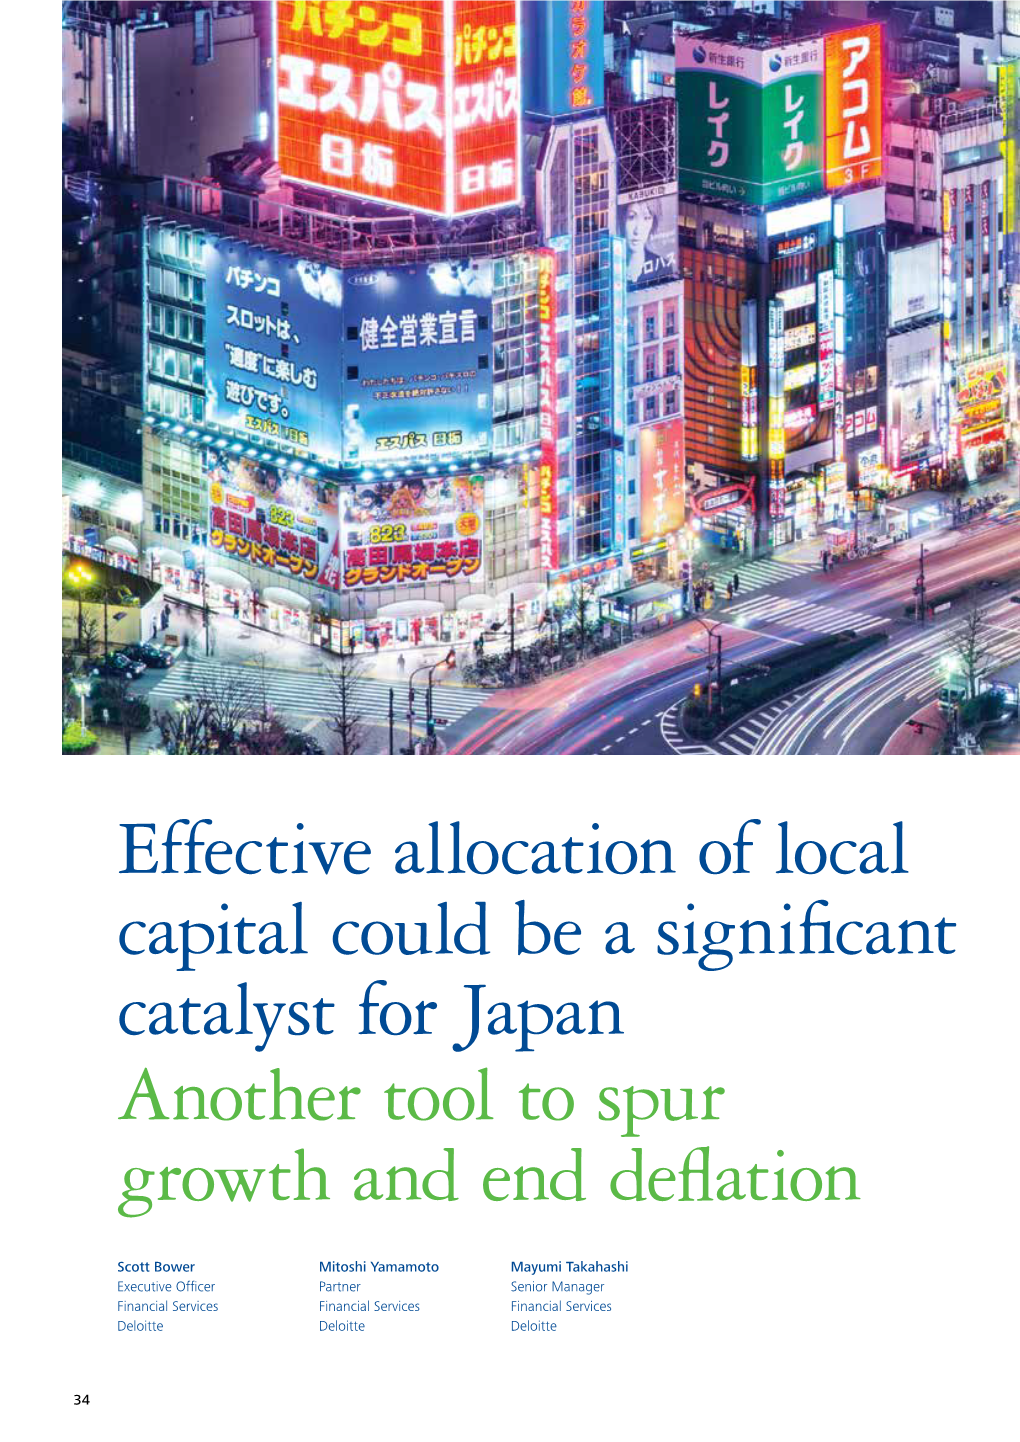 Effective Allocation of Local Capital Could Be a Significant Catalyst for Japan Another Tool to Spur Growth and End Deflation